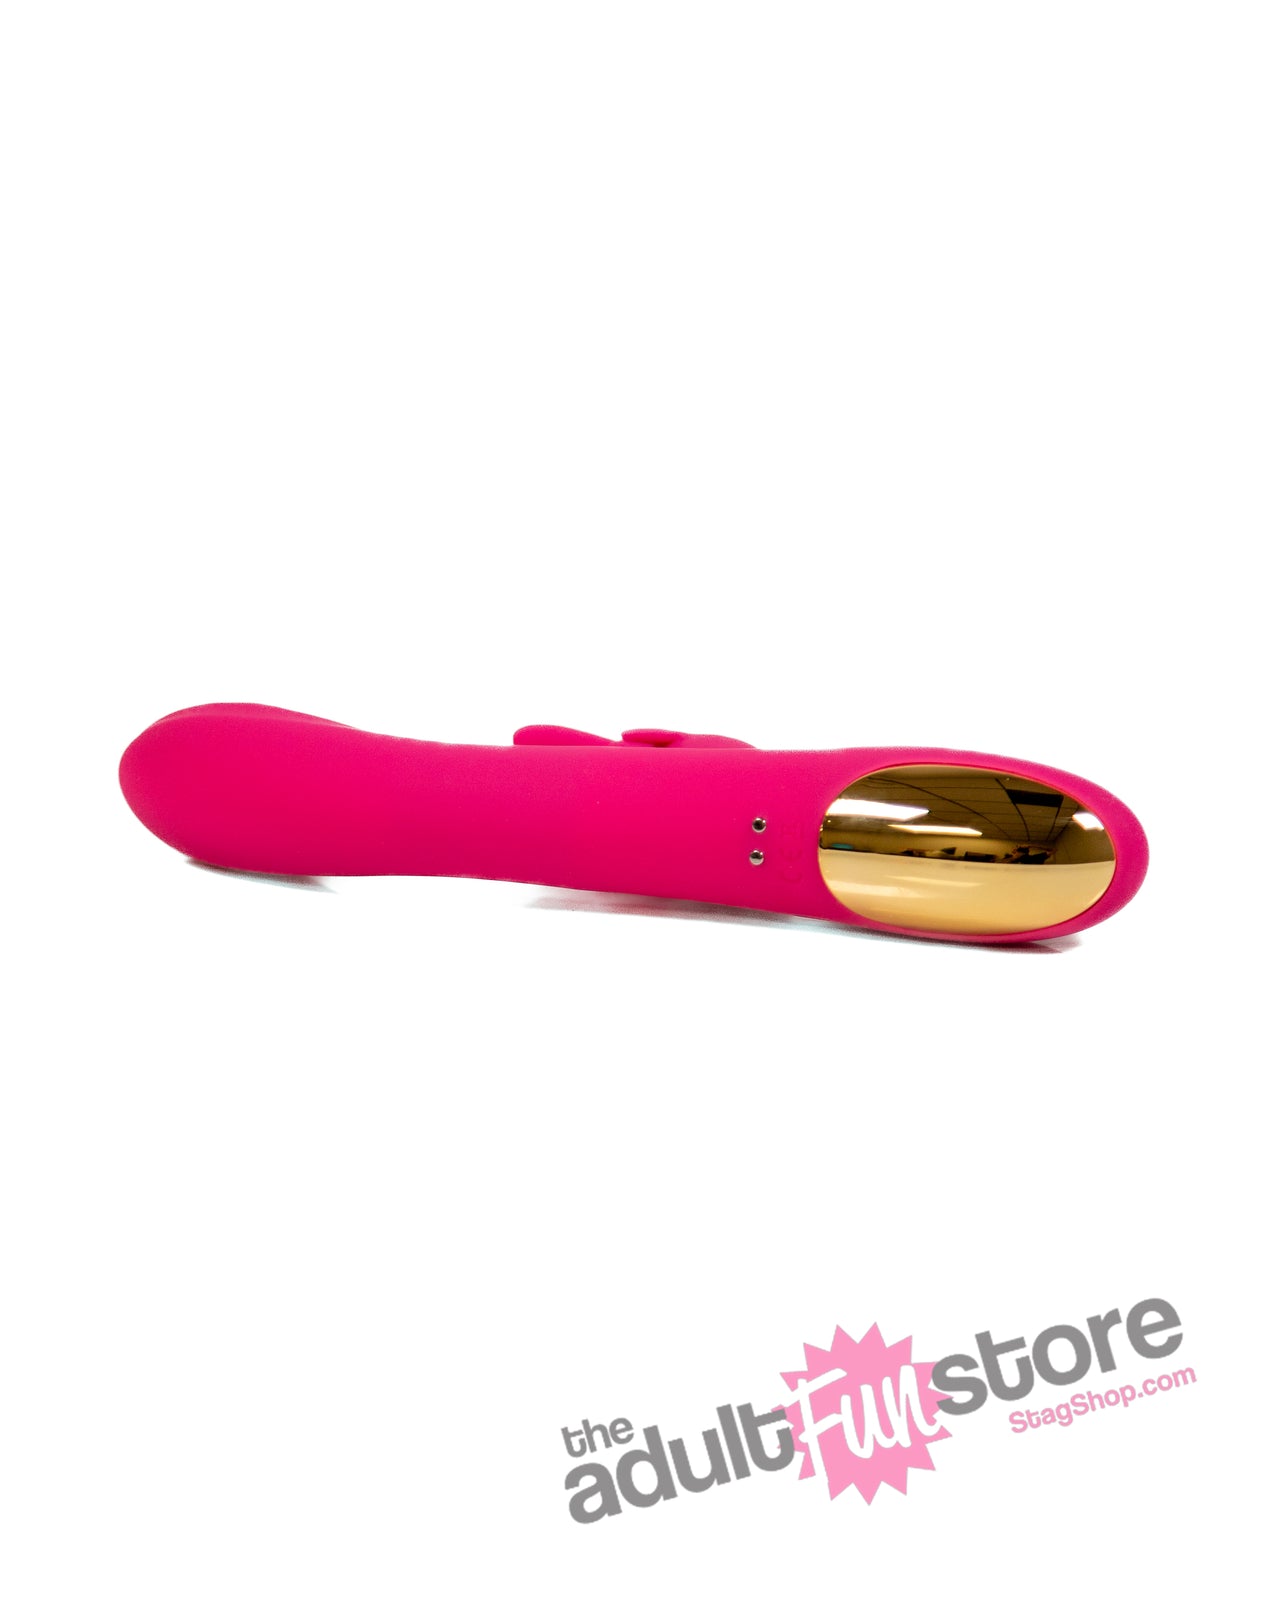 Cousins Group - Intimately GG - GG Spot & Clitoral Dual Vibrator - Pink - Stag Shop